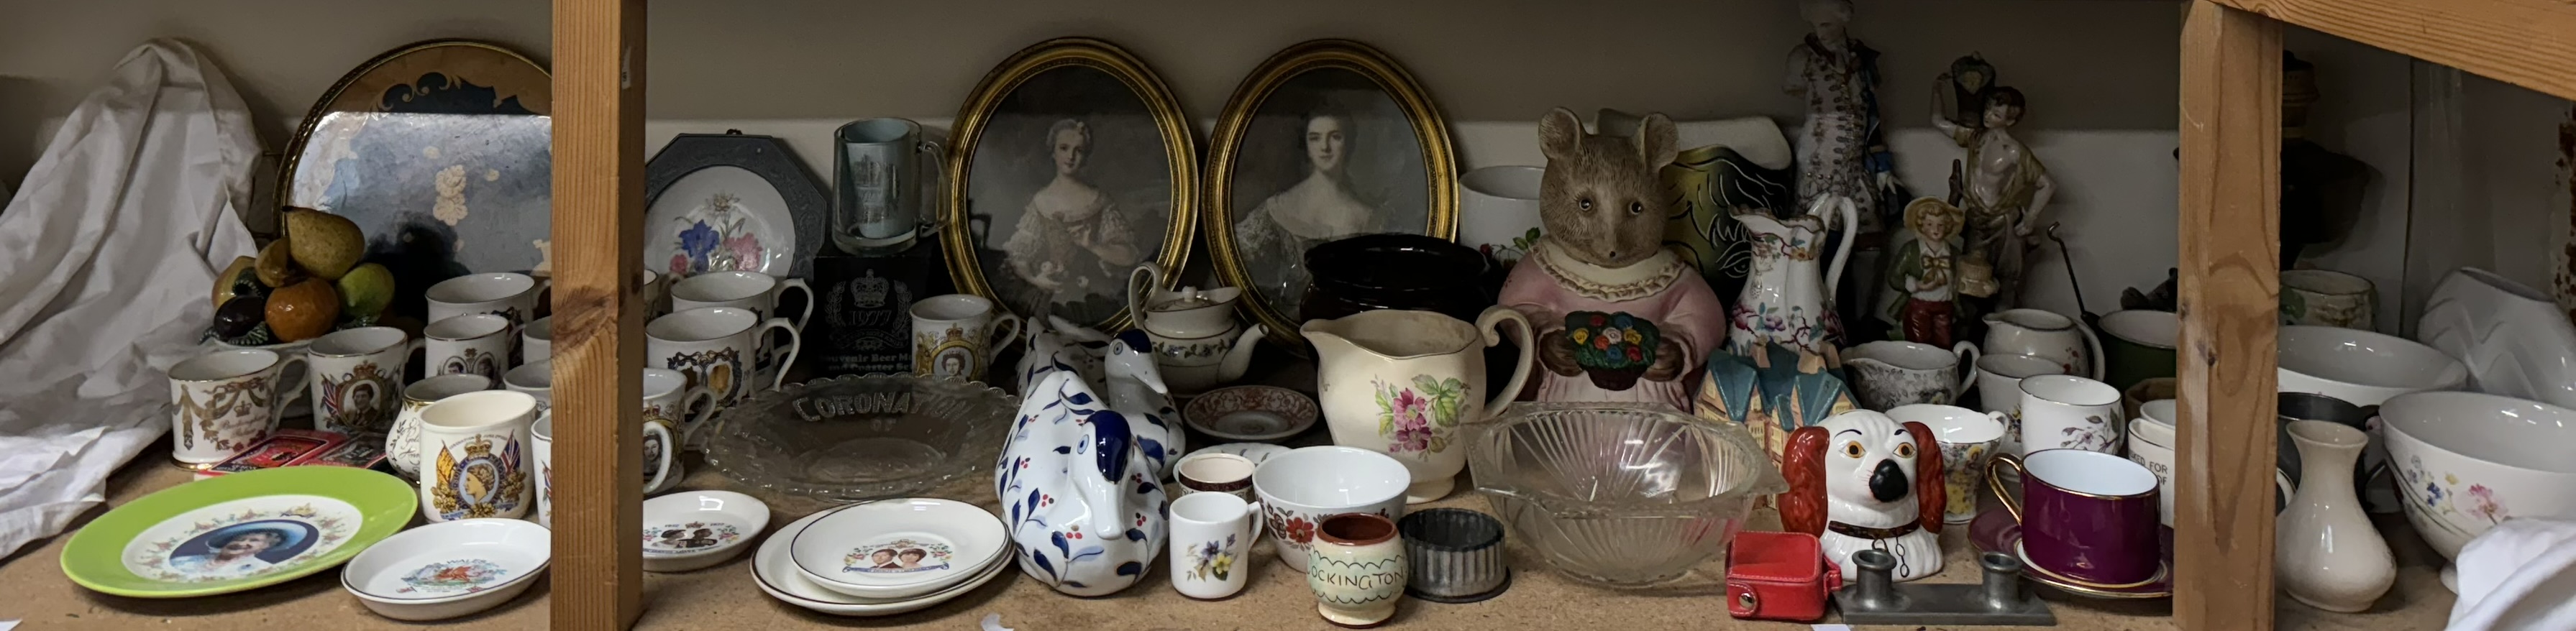 A Wedgwood pottery teapot together with commemorative china, oval portrait prints, oil lamp, tray,